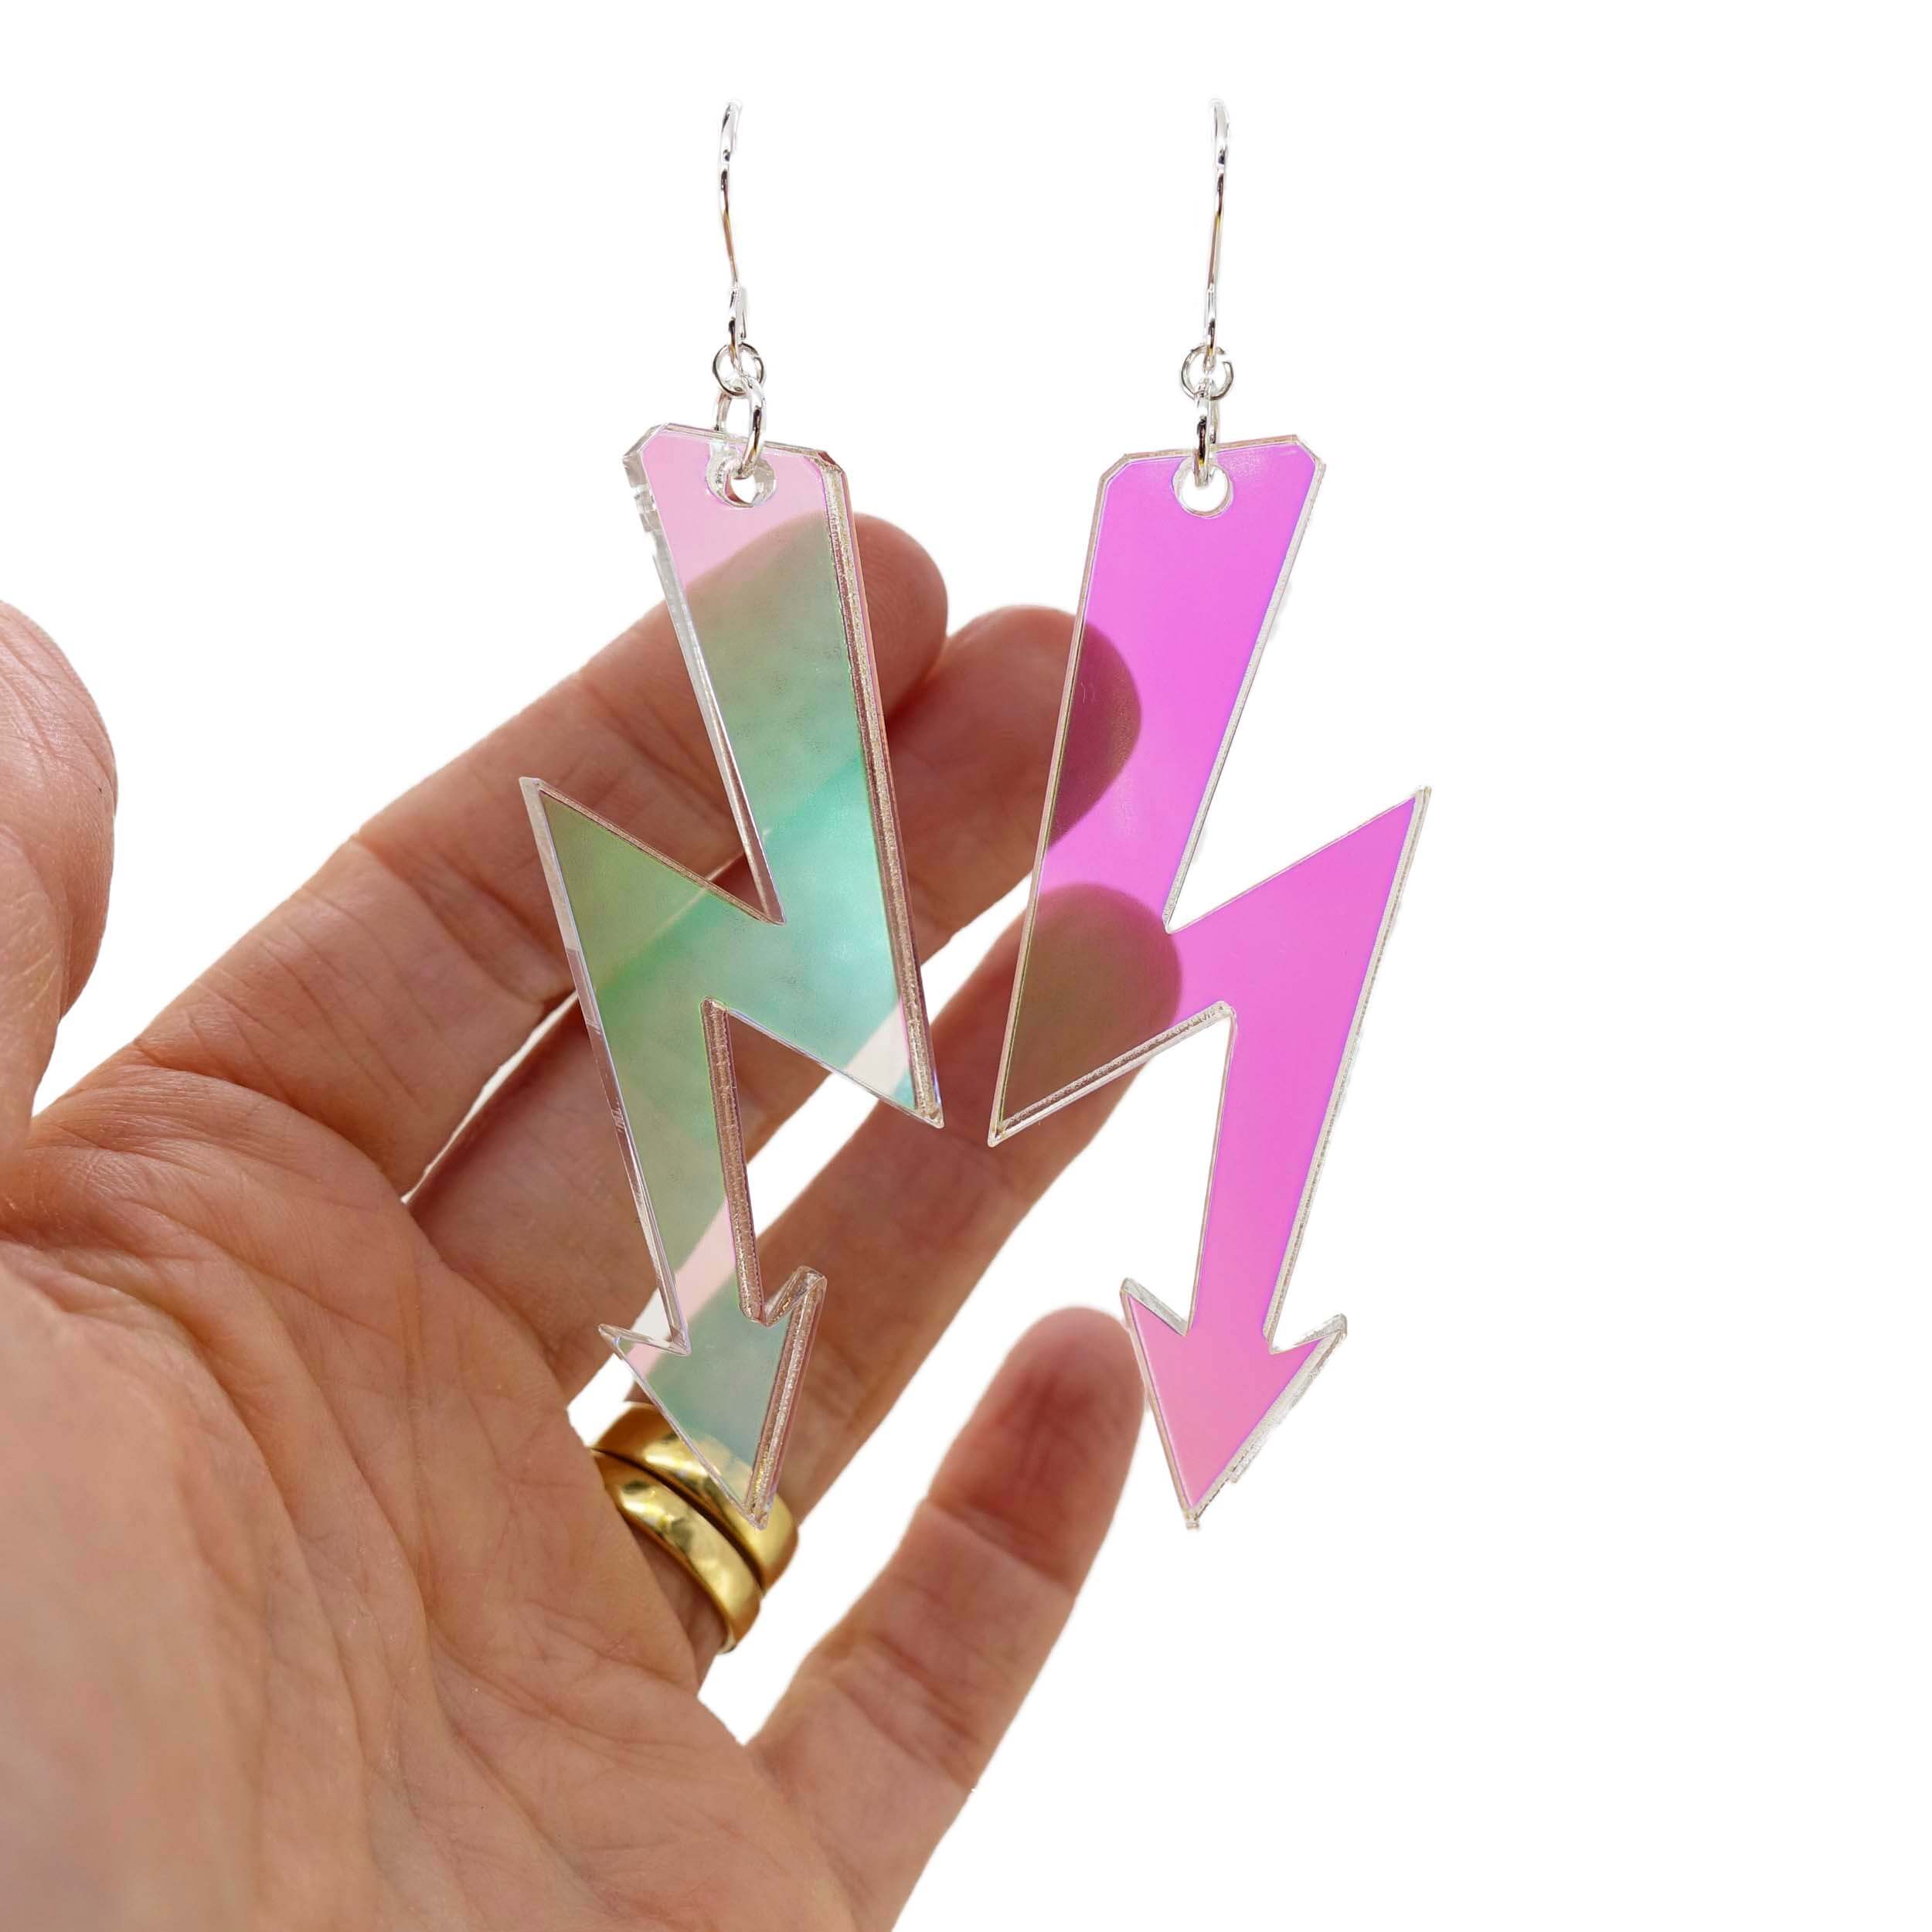 Iridescent High Voltage earrings shown against a white background with my hand behind to illustrate the transparency of the material. 